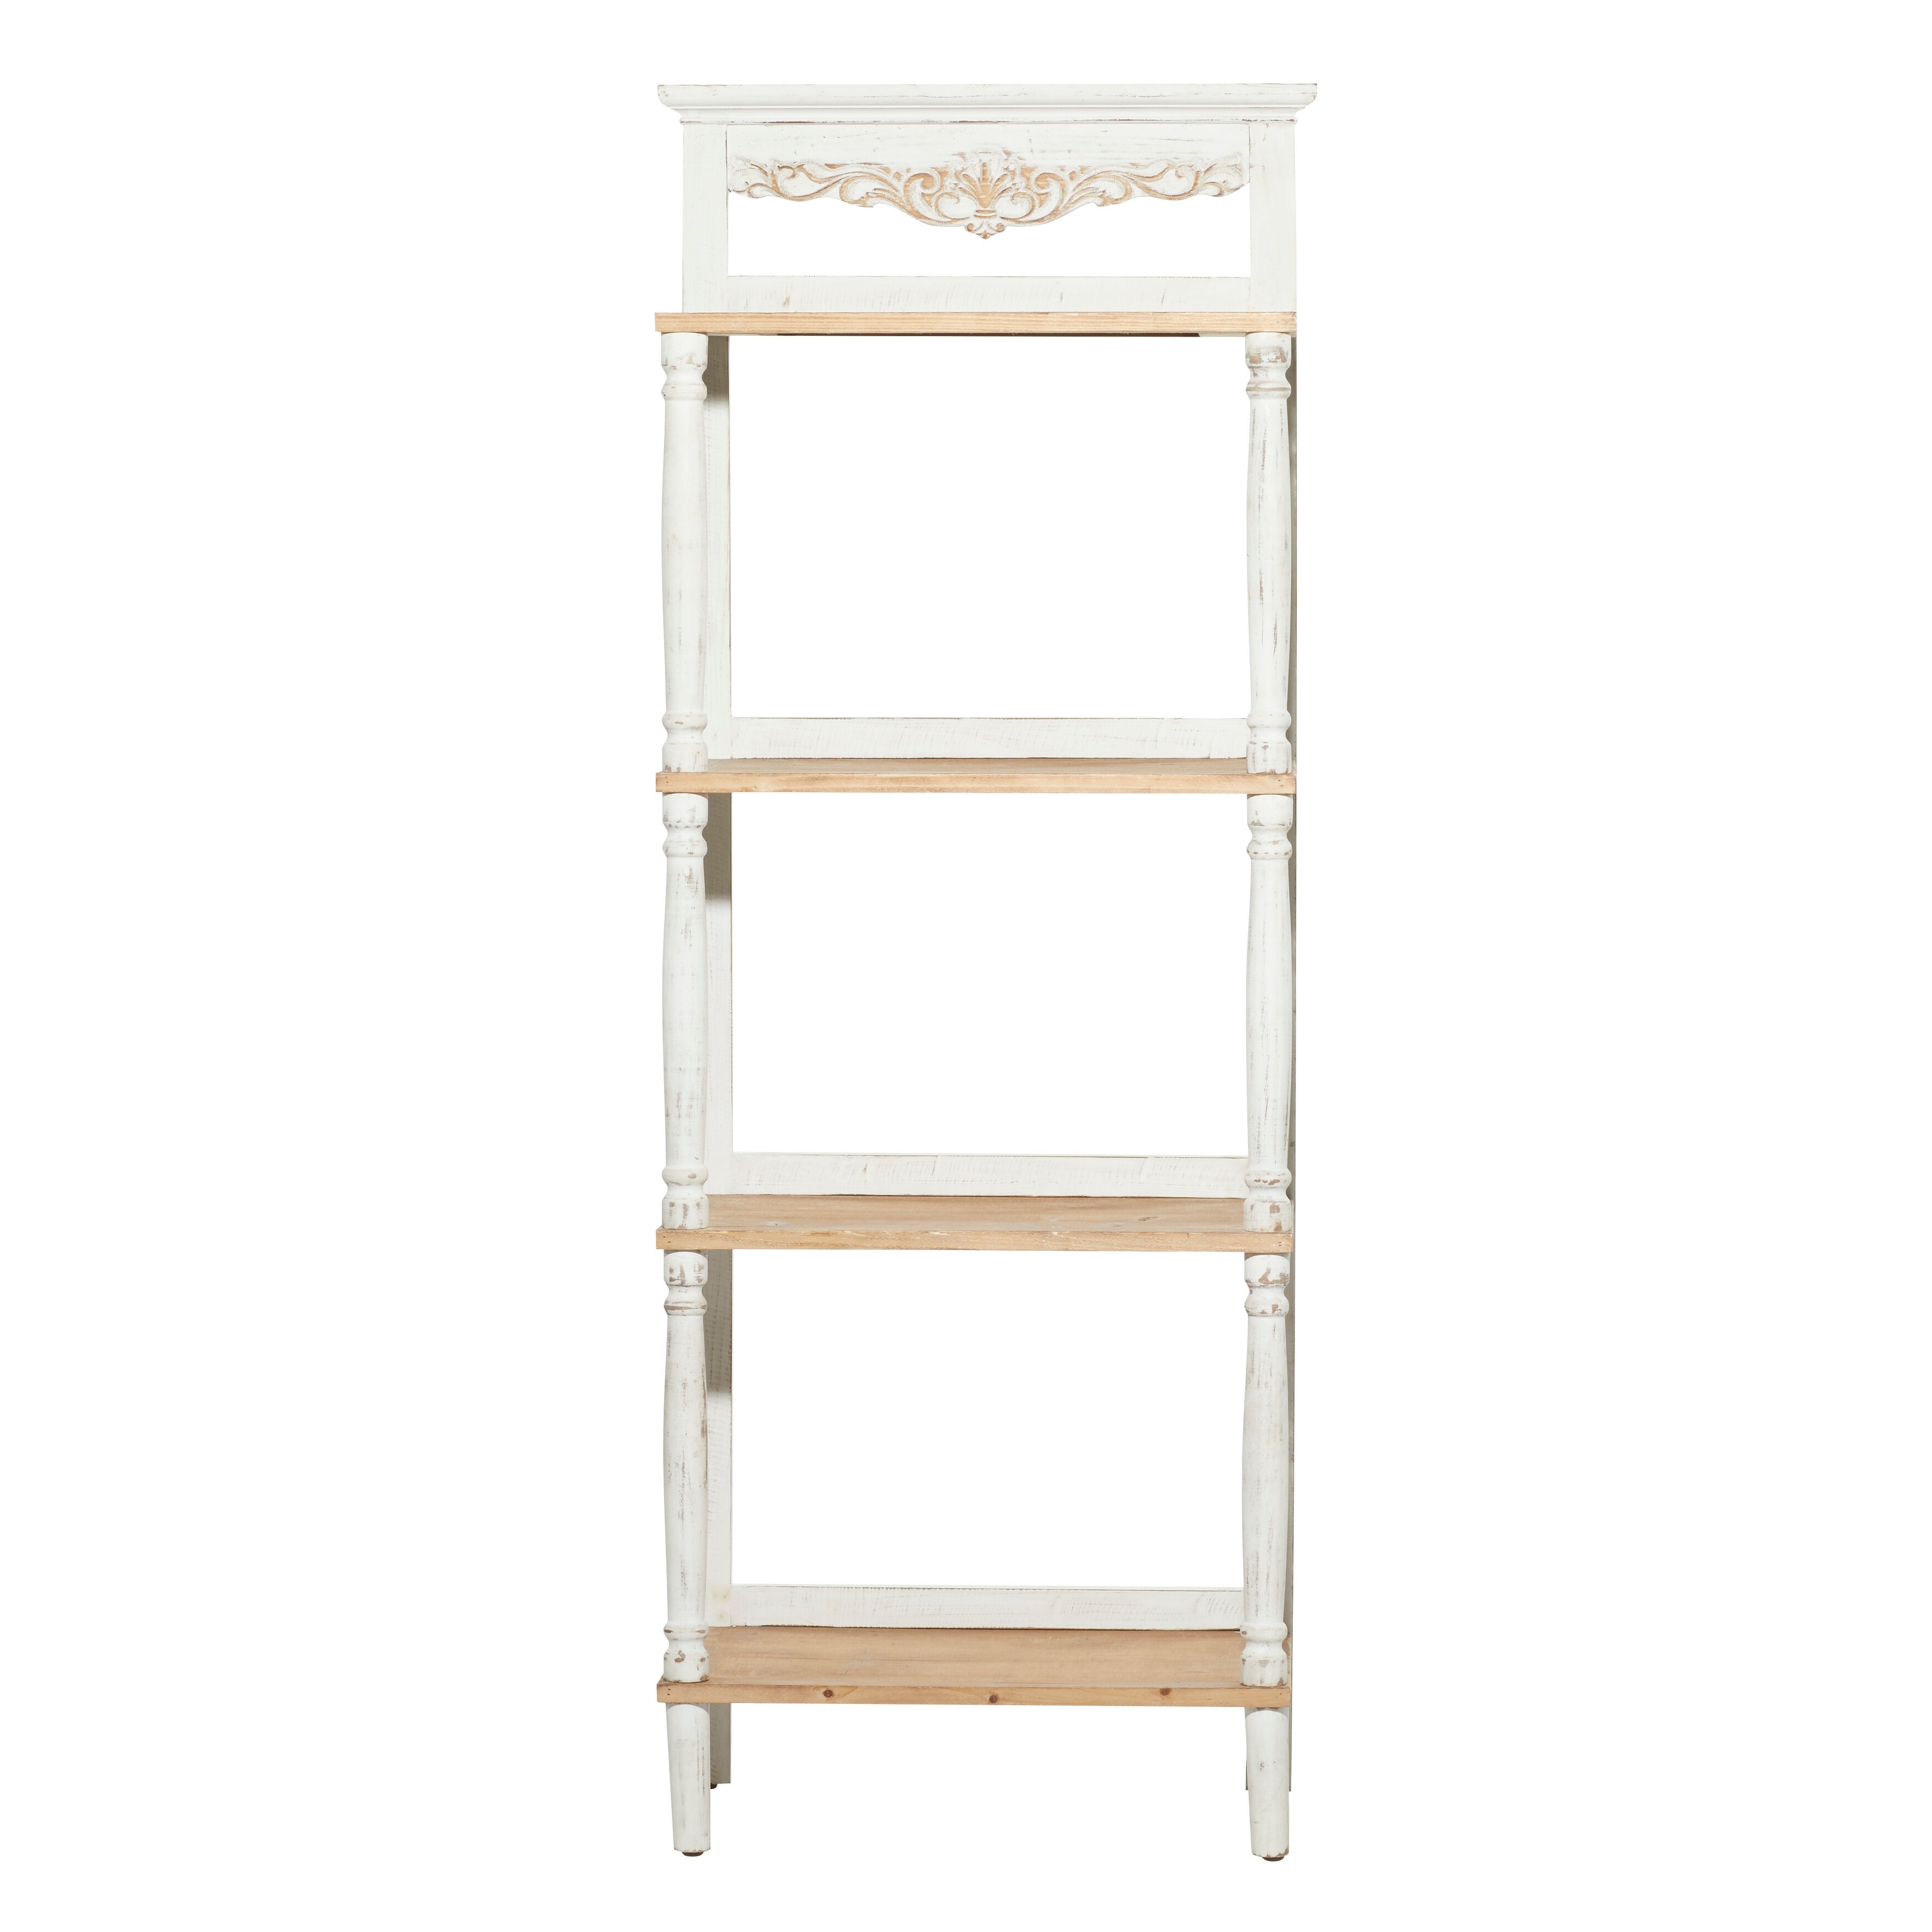 32.25 White Solid Large Wooden Peg Rack with Shelf - Bed Bath & Beyond -  31712216